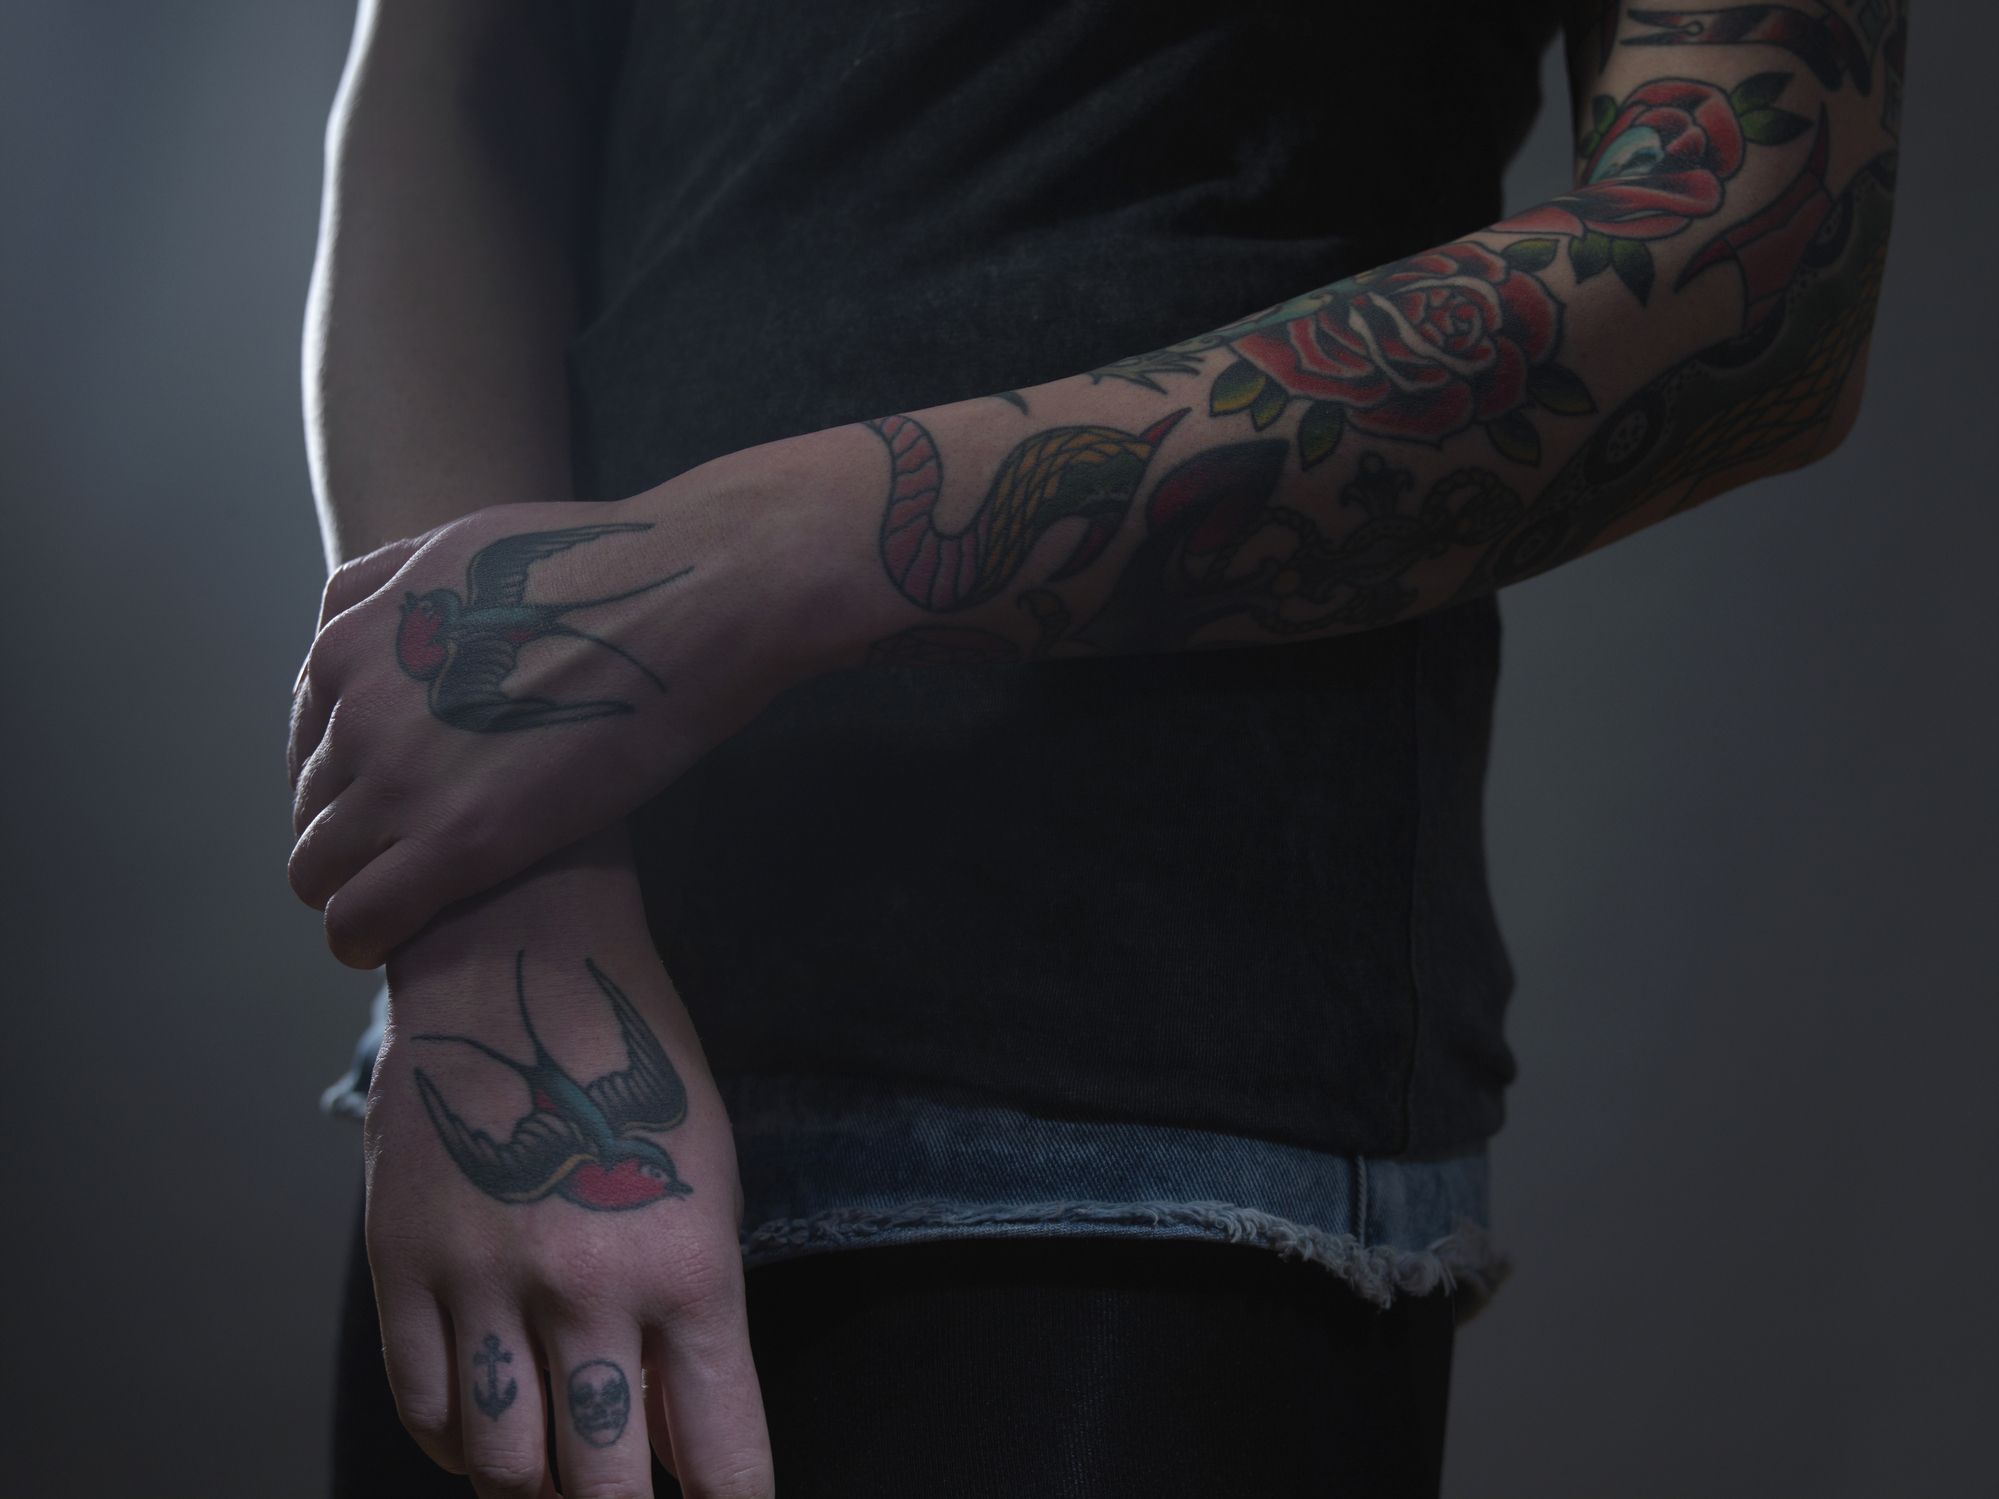 Cool Meaningful Tattoo Designs For Boys & Girls